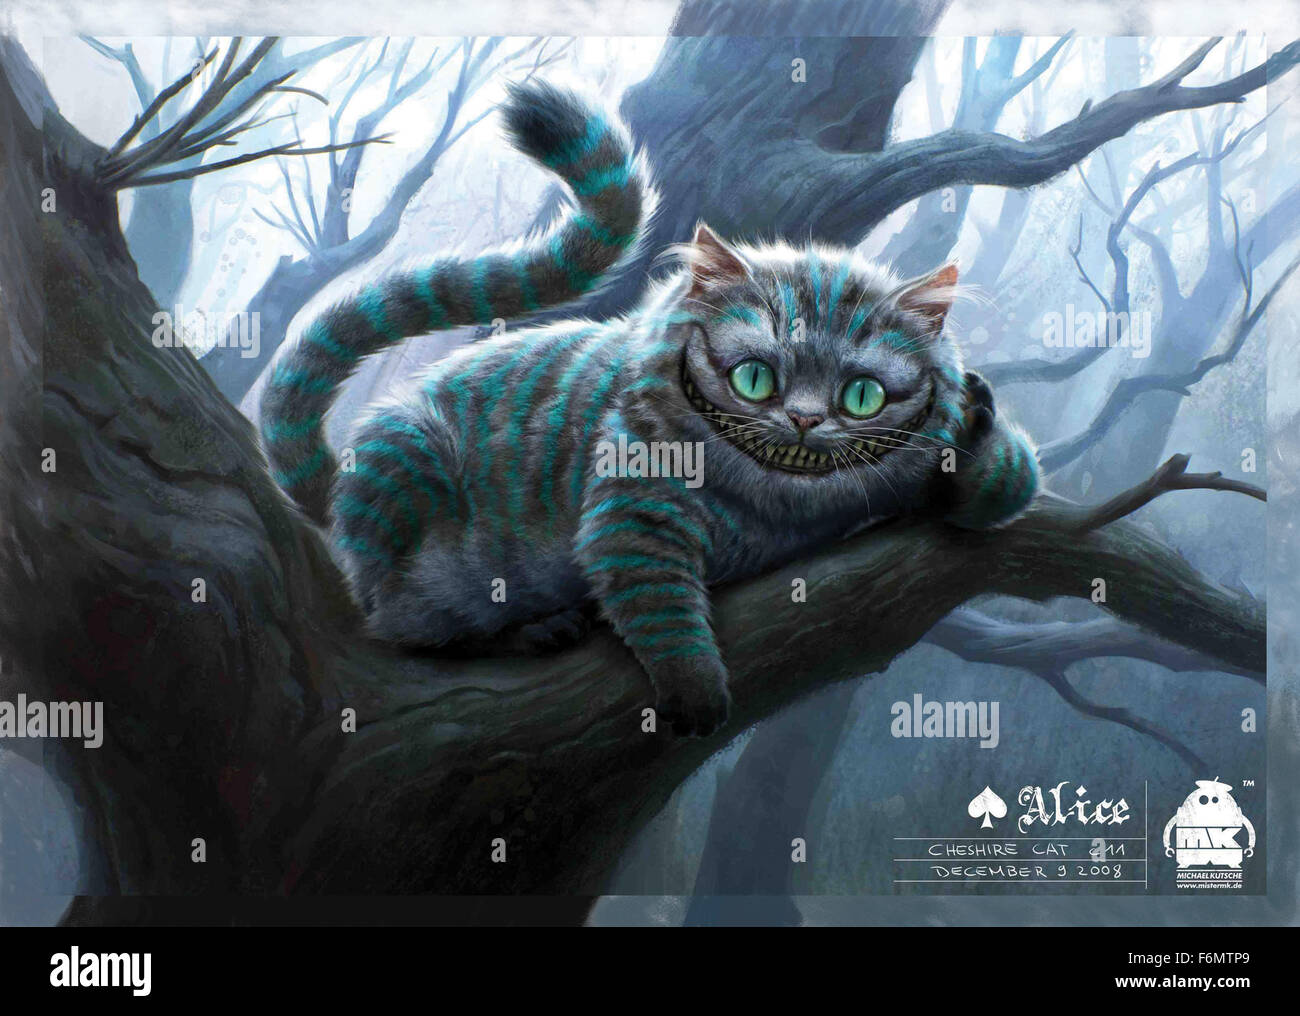 RELEASE DATE: March 5, 2010   MOVIE TITLE: Alice in Wonderland   STUDIO: Walt Disney Pictures   DIRECTOR: Tim Burton   PLOT: 19-year-old Alice returns to the magical world from her childhood adventure, where she reunites with her old friends and learns of her true destiny: to end the Red Queen's reign of terror   PICTURED: Cheshire Cat concept art   (Credit Image: c Walt Disney Pictures/Entertainment Pictures) Stock Photo